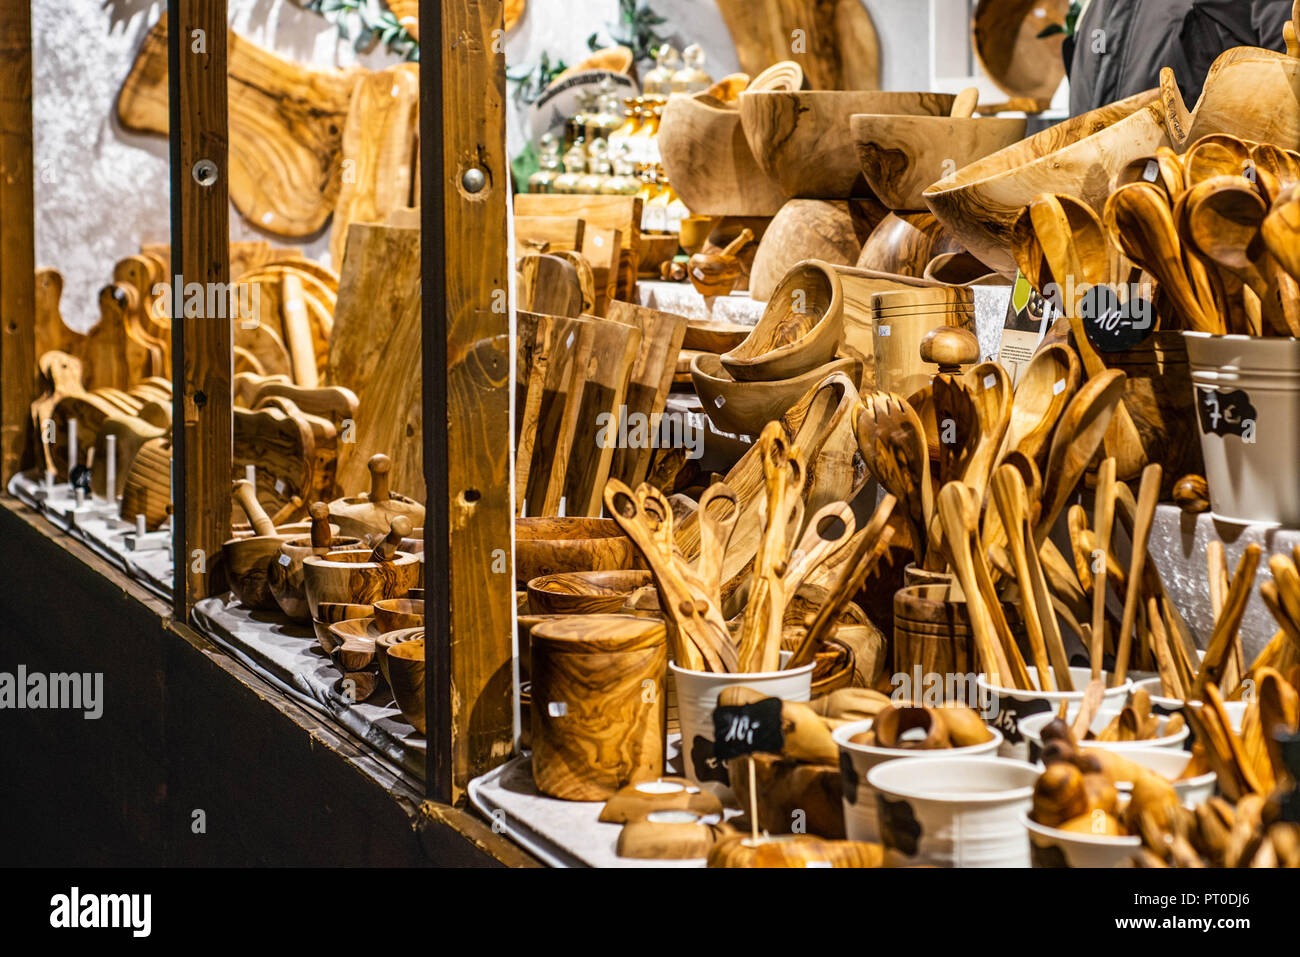 Bonn Germany 17.12.2017 shop selling Wood working, making wooden kitchen tools and decoration Christmas market. Stock Photo